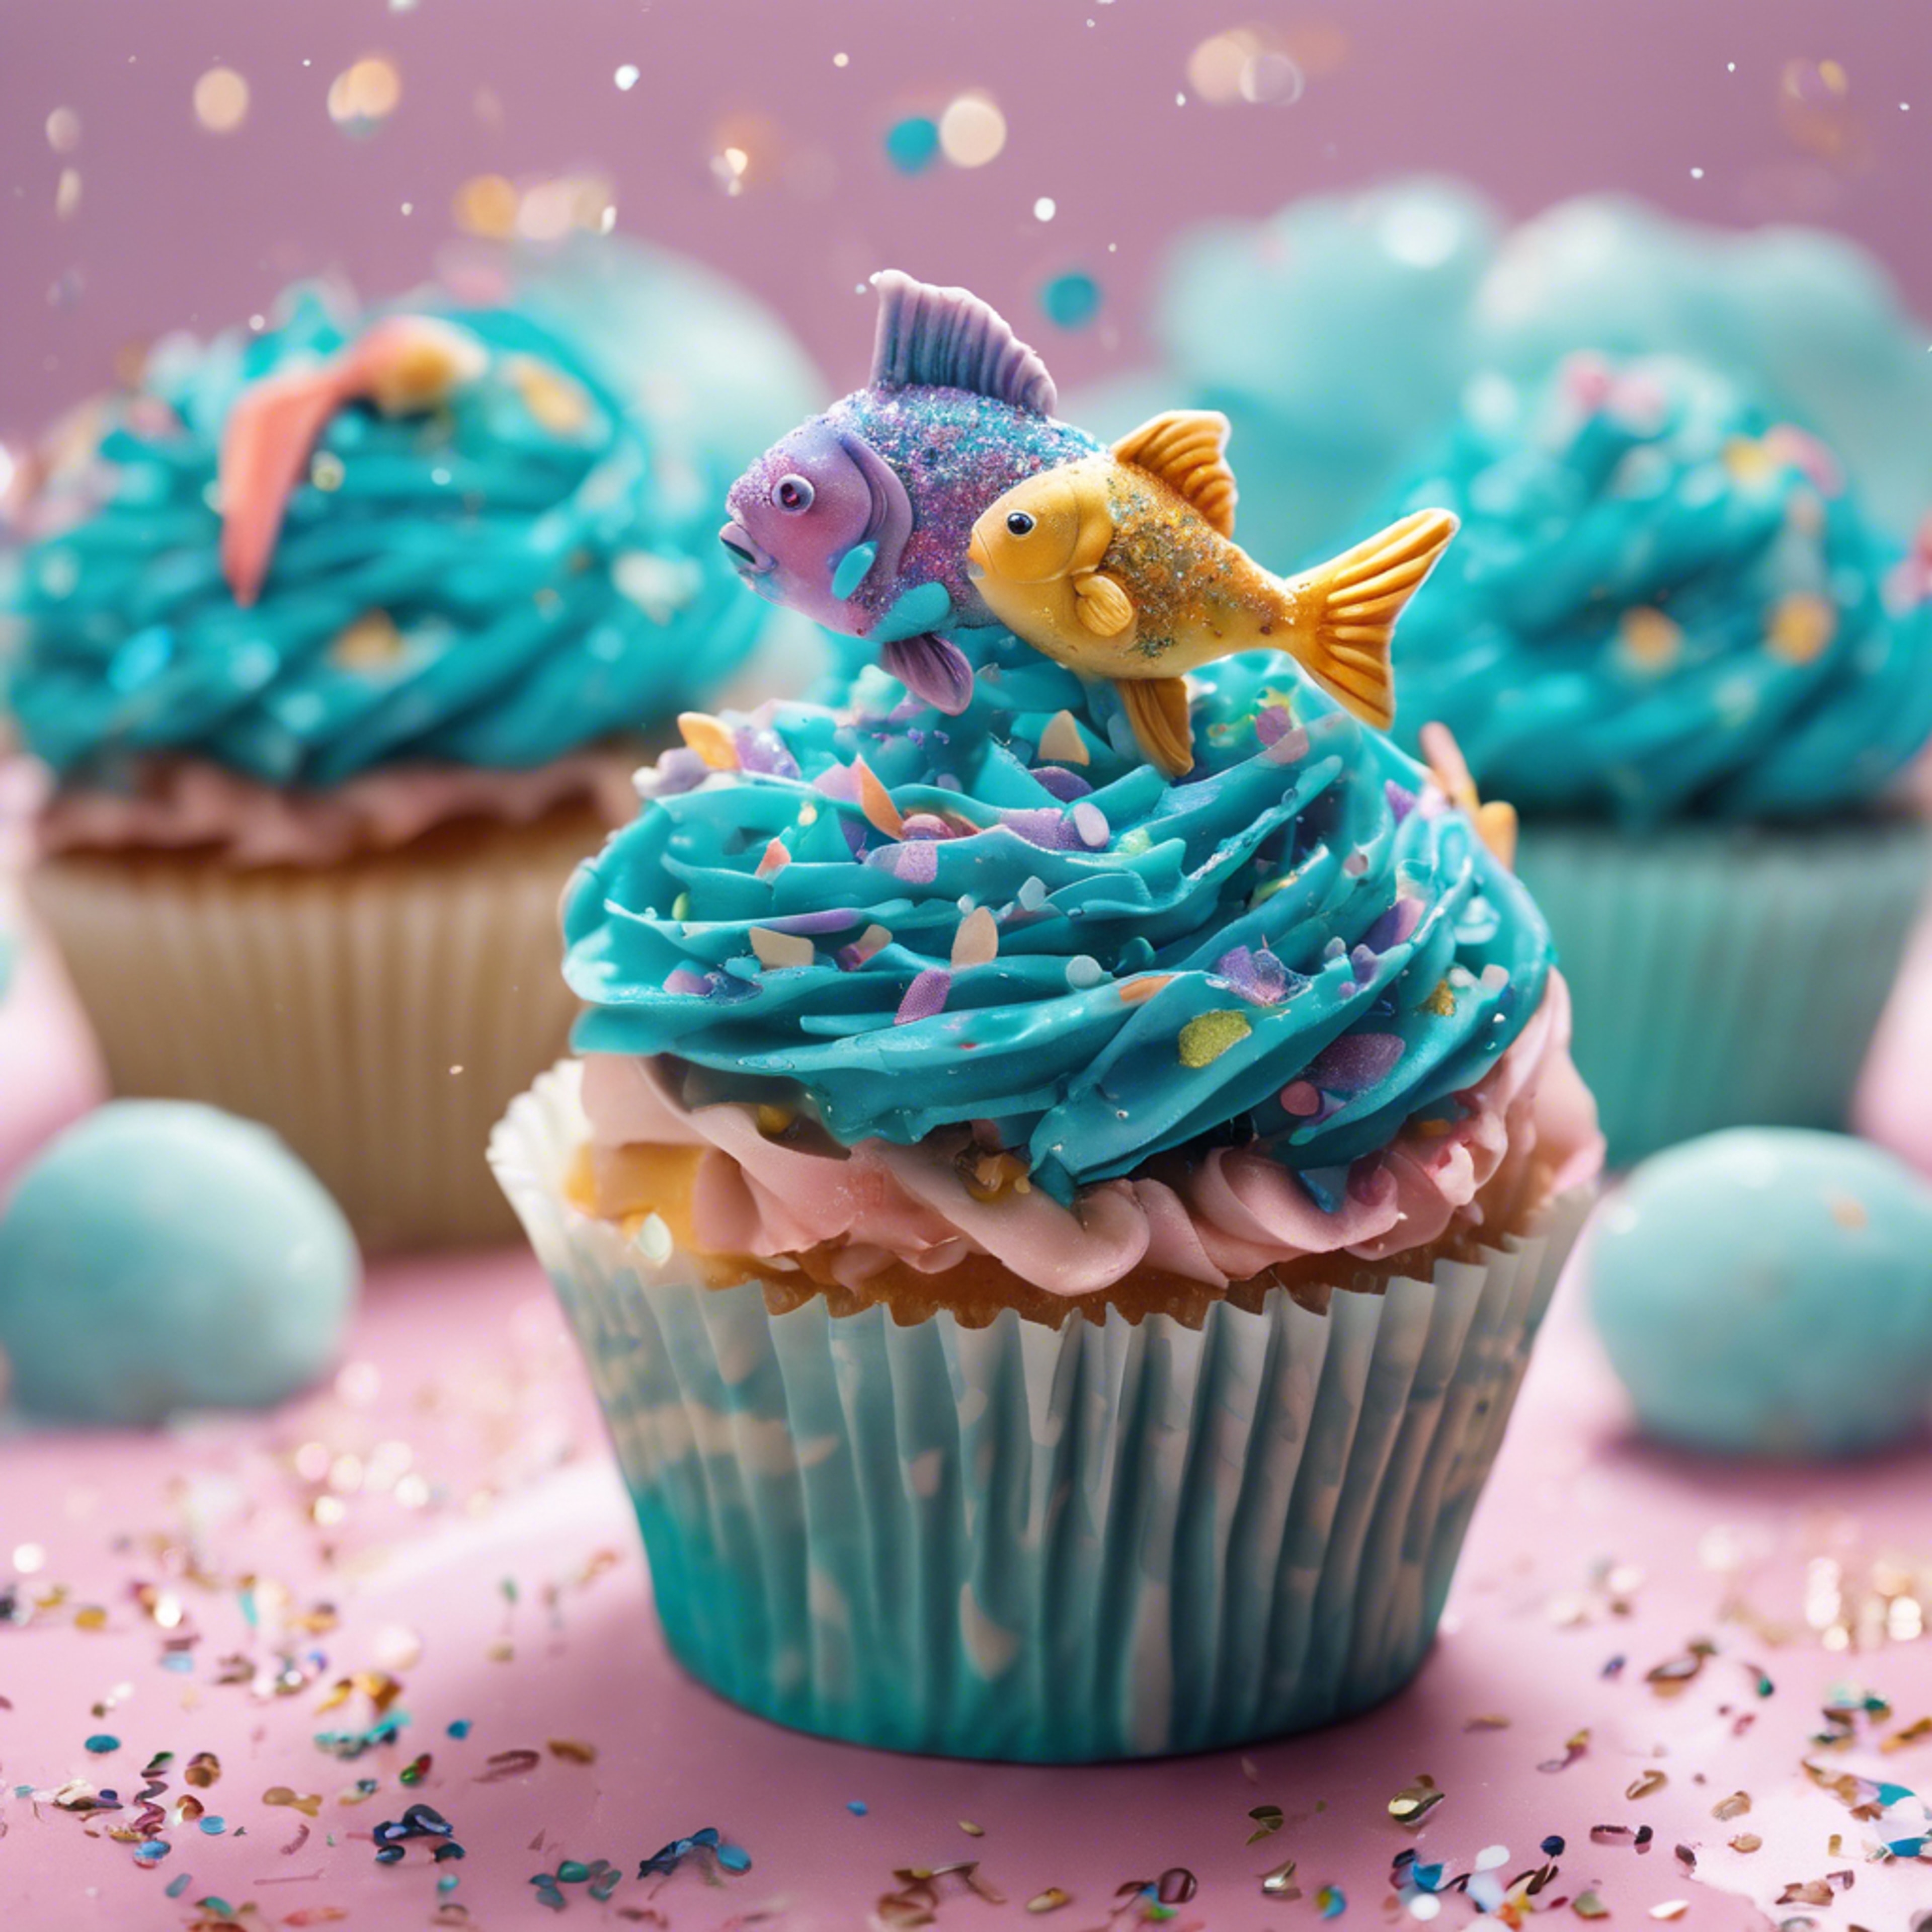 A whimsical Pisces-themed cupcake, with decorative icing representing two cute fish swimming in a sea of sprinkles. 벽지[694d5145c111483cb550]